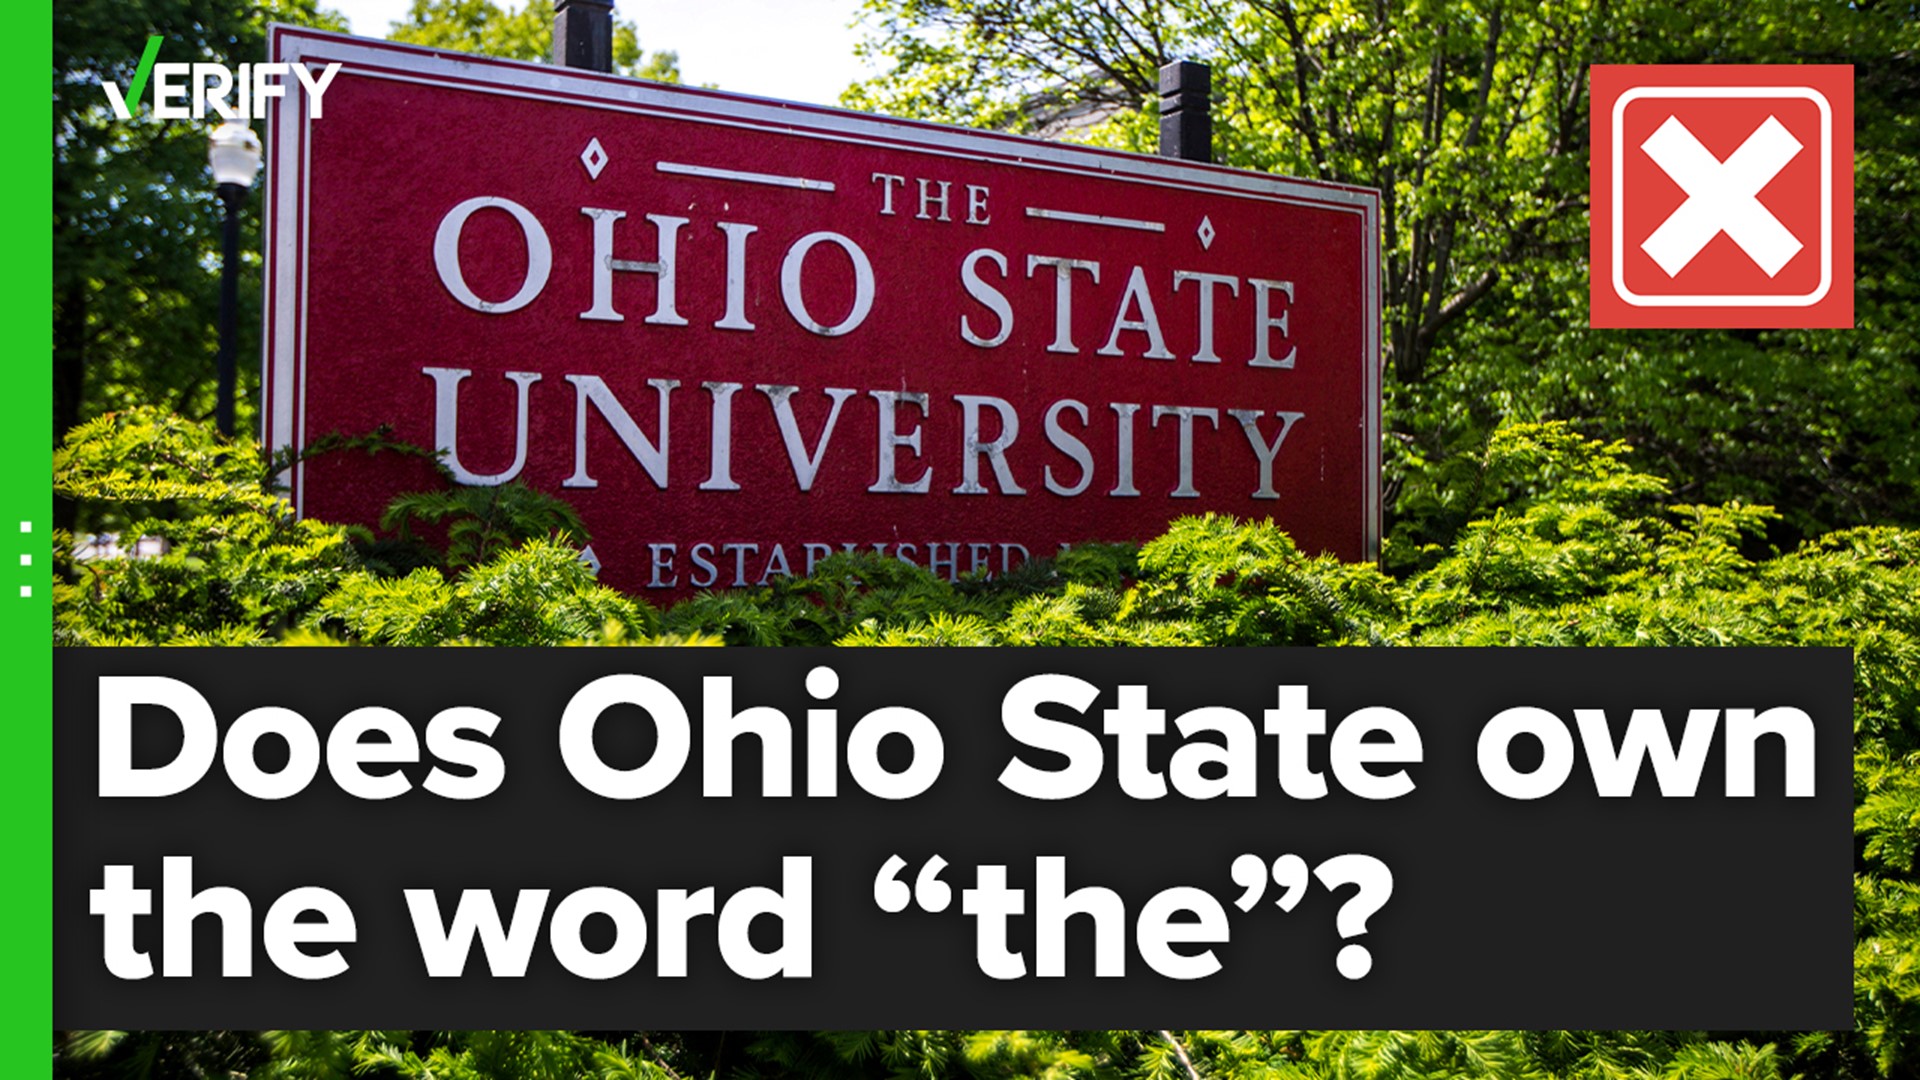 Ohio State’s new trademark for “THE” doesn’t prevent anyone from using the word. It just prevents colleges from making it the main element on athletic apparel.